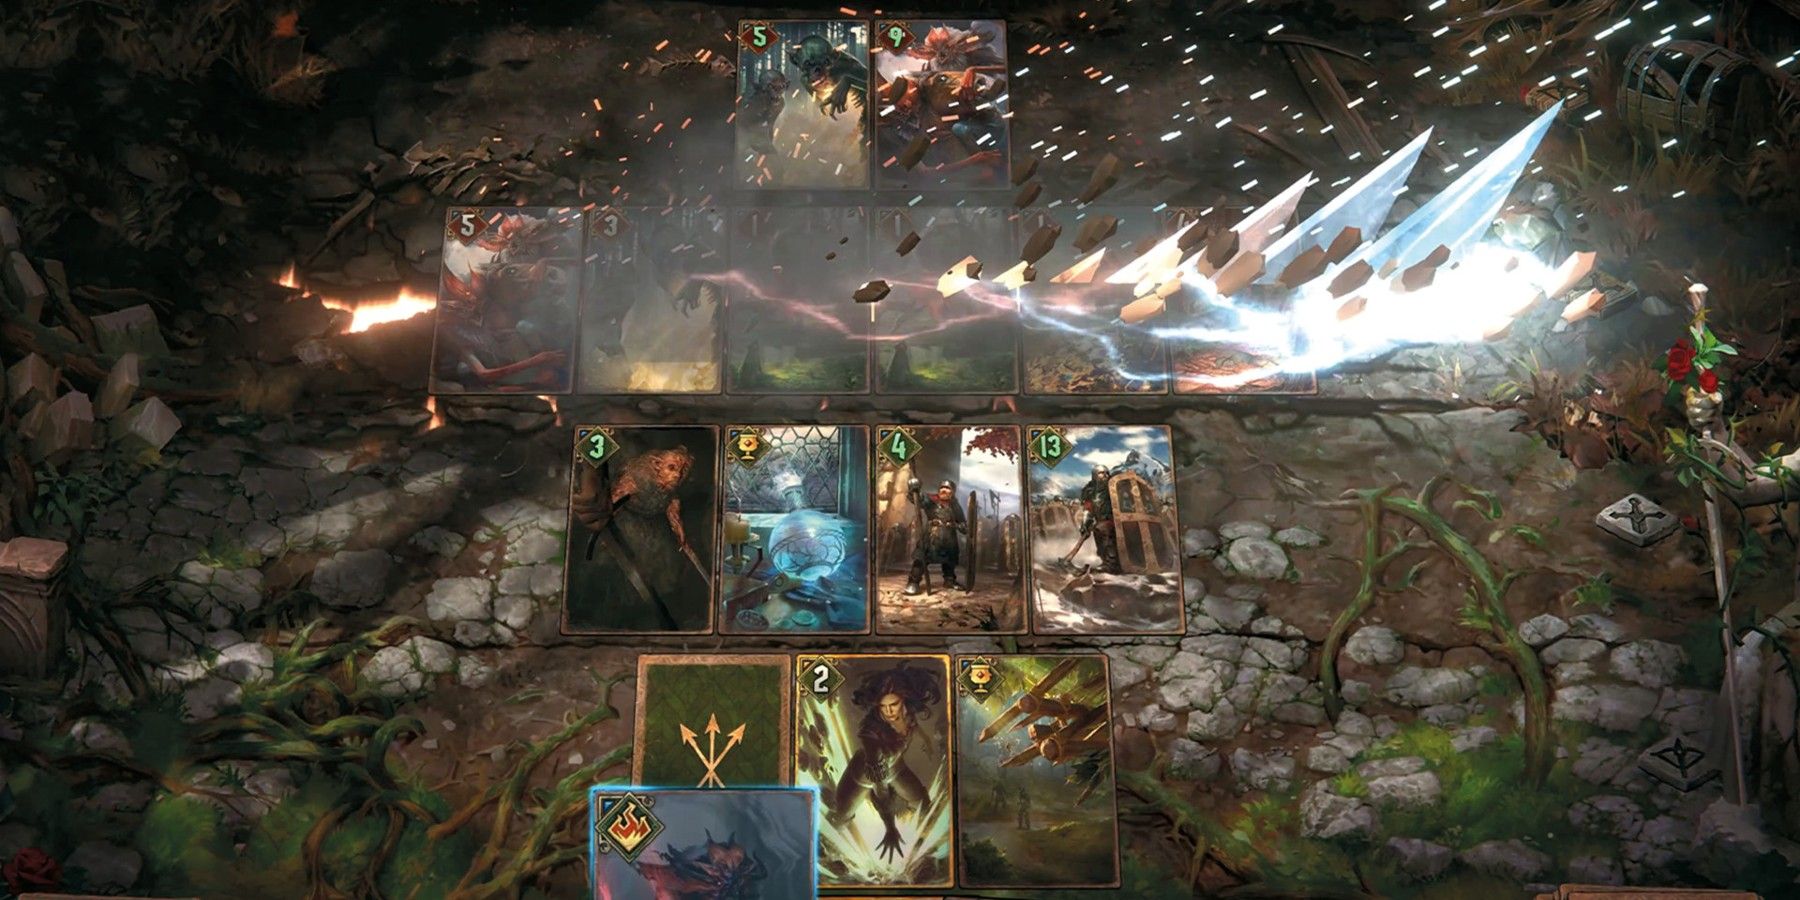 Gwent Witcher card game ground rupture earthquake with cards placed